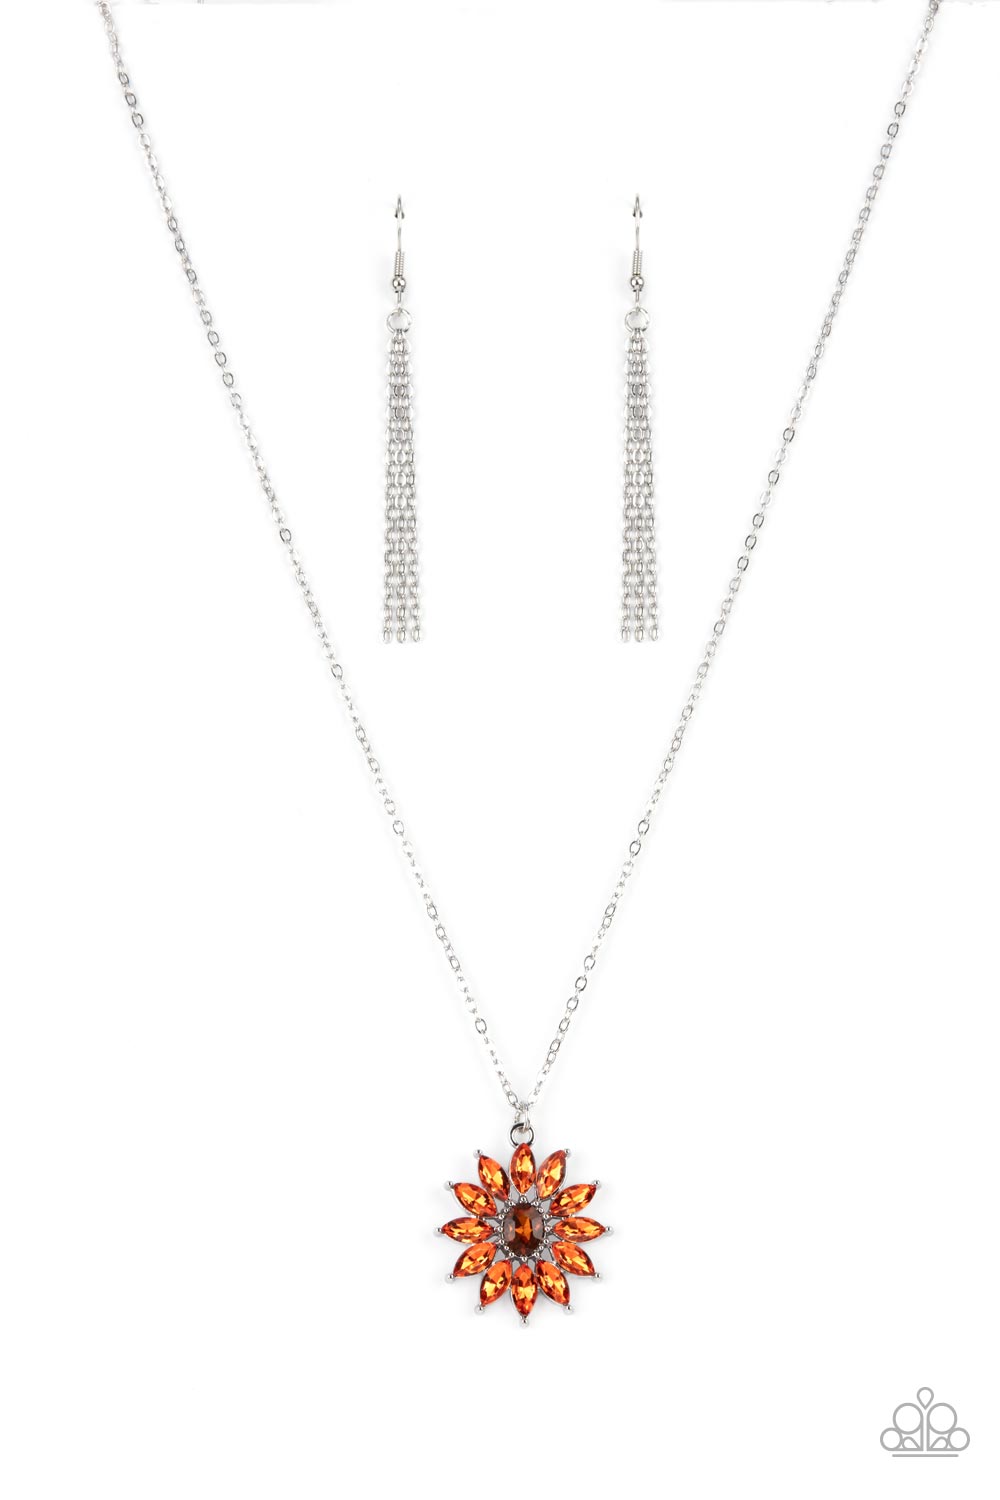 Formal Florals Orange Necklace - Paparazzi Accessories  Glittery orange marquise cut rhinestones fan out from an oval topaz rhinestone center, creating a fabulous floral pendant at the bottom of a dainty silver chain. Features an adjustable clasp closure.  Sold as one individual necklace. Includes one pair of matching earrings.